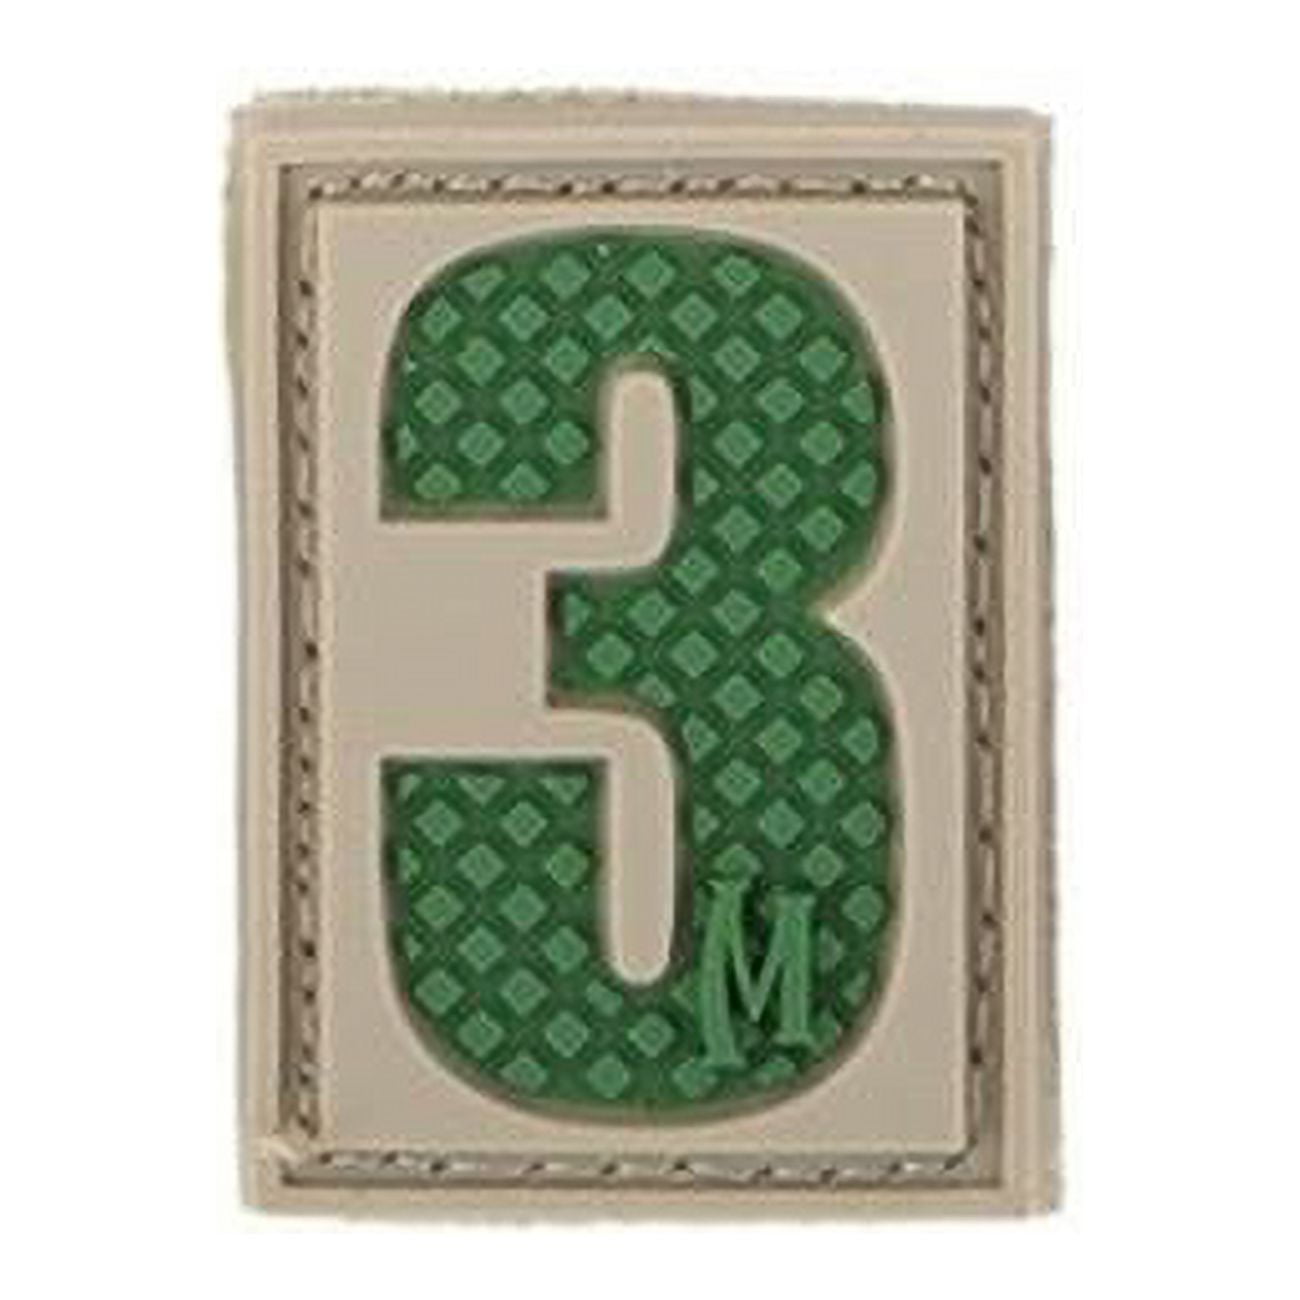 troop number patches